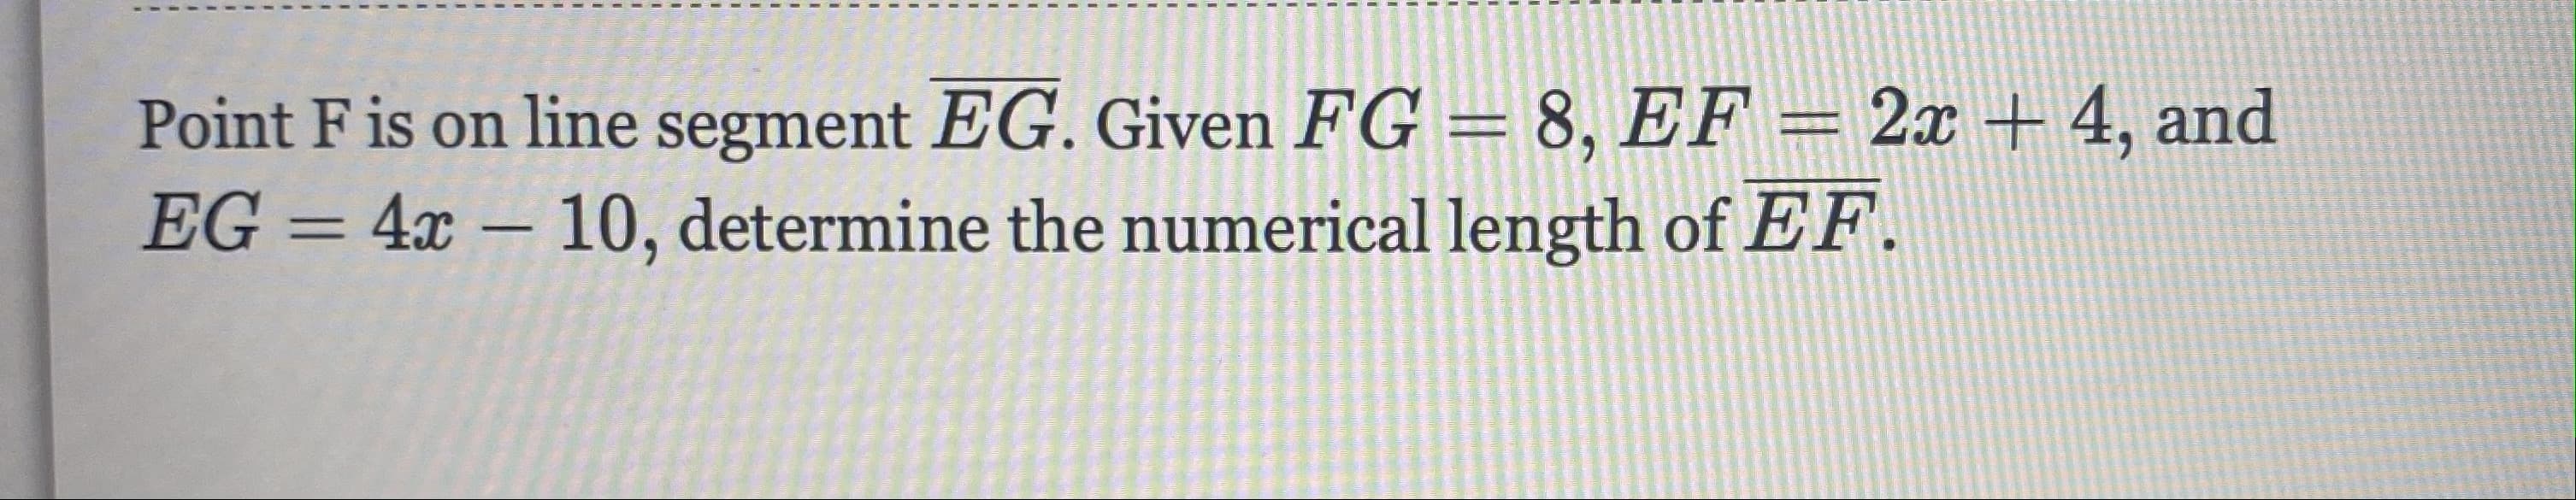 Point F is on line segment EG. Given FG = 8, EF = 2x+ 4, and
EG = 4x – 10, determine the numerical length of EF.
%3D
